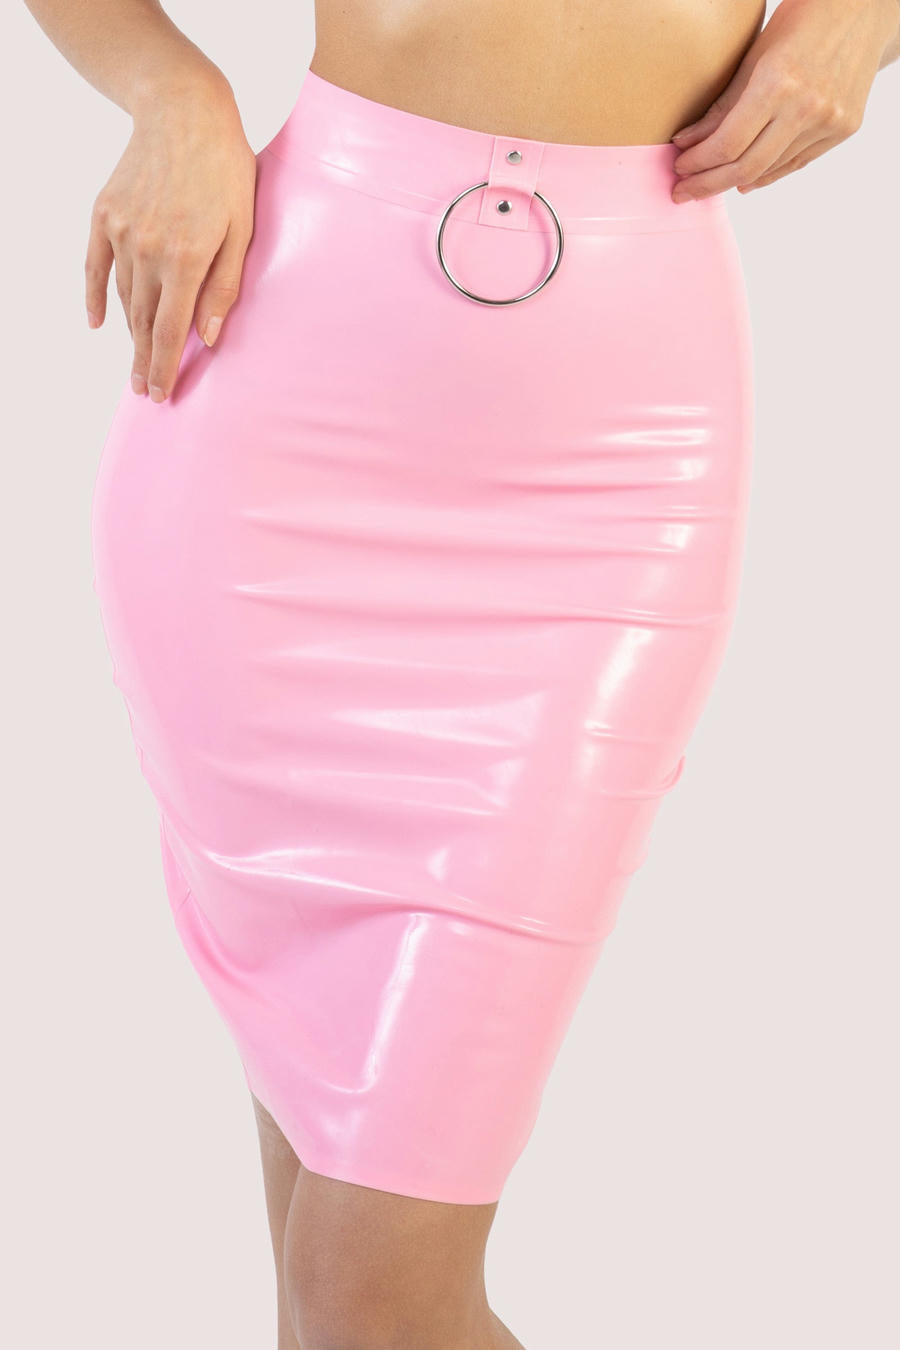 Imogen - Pink Latex Pencil Skirt by Bettie Page